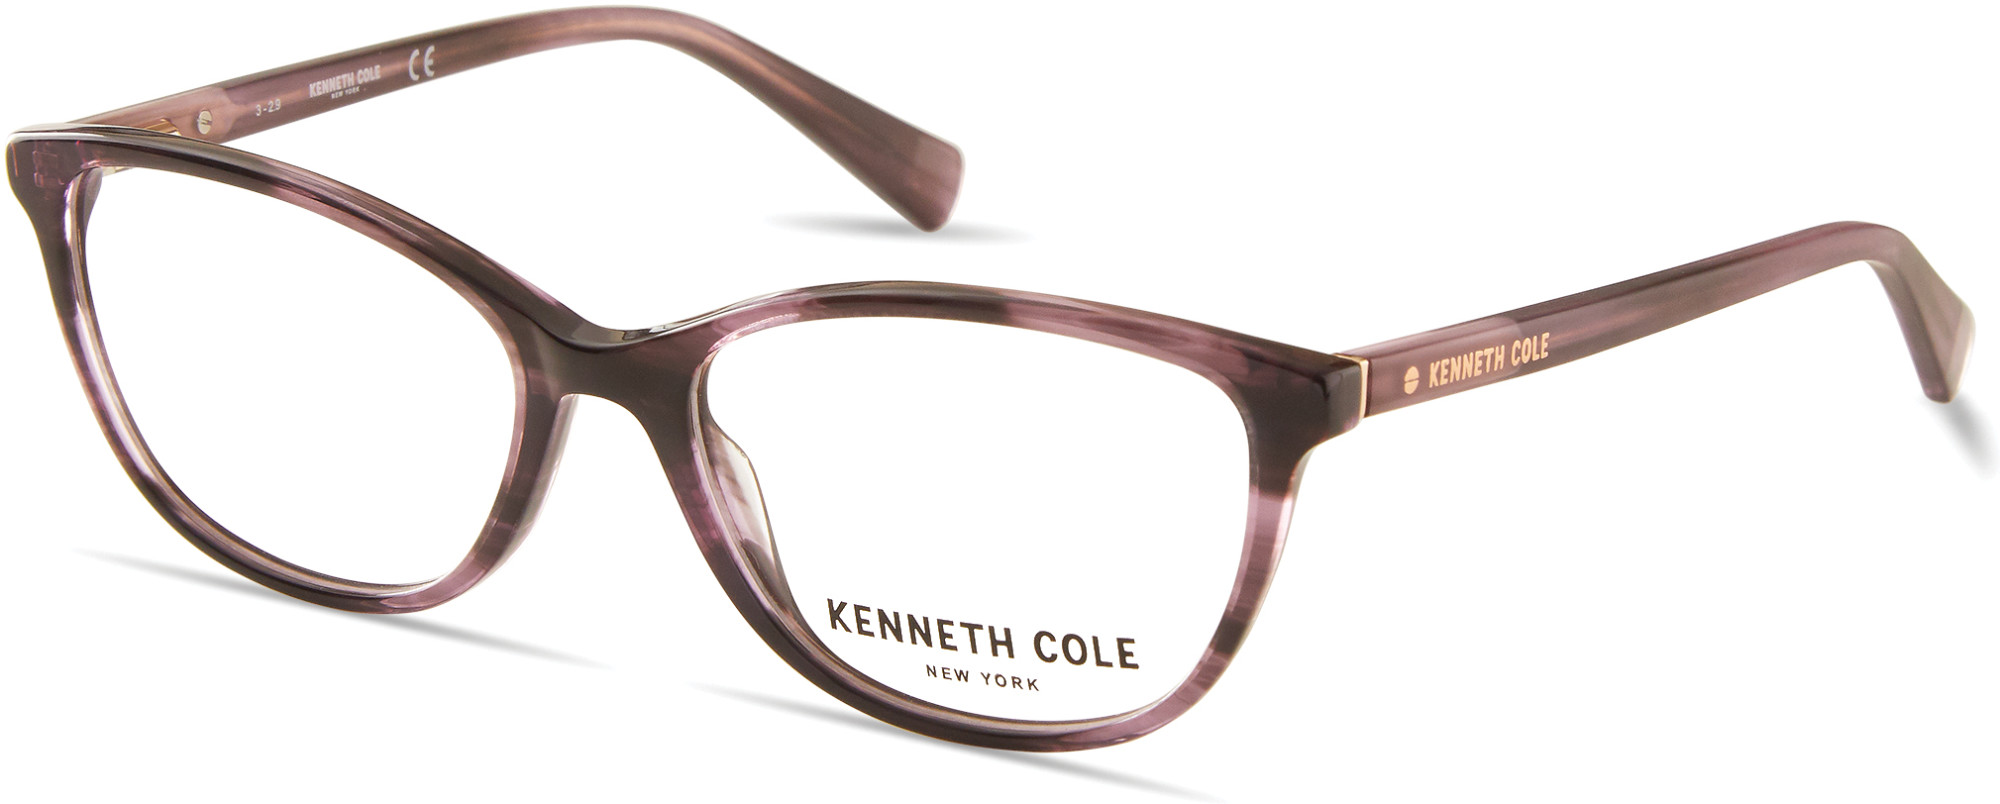 KENNETH COLE NY 0308 083